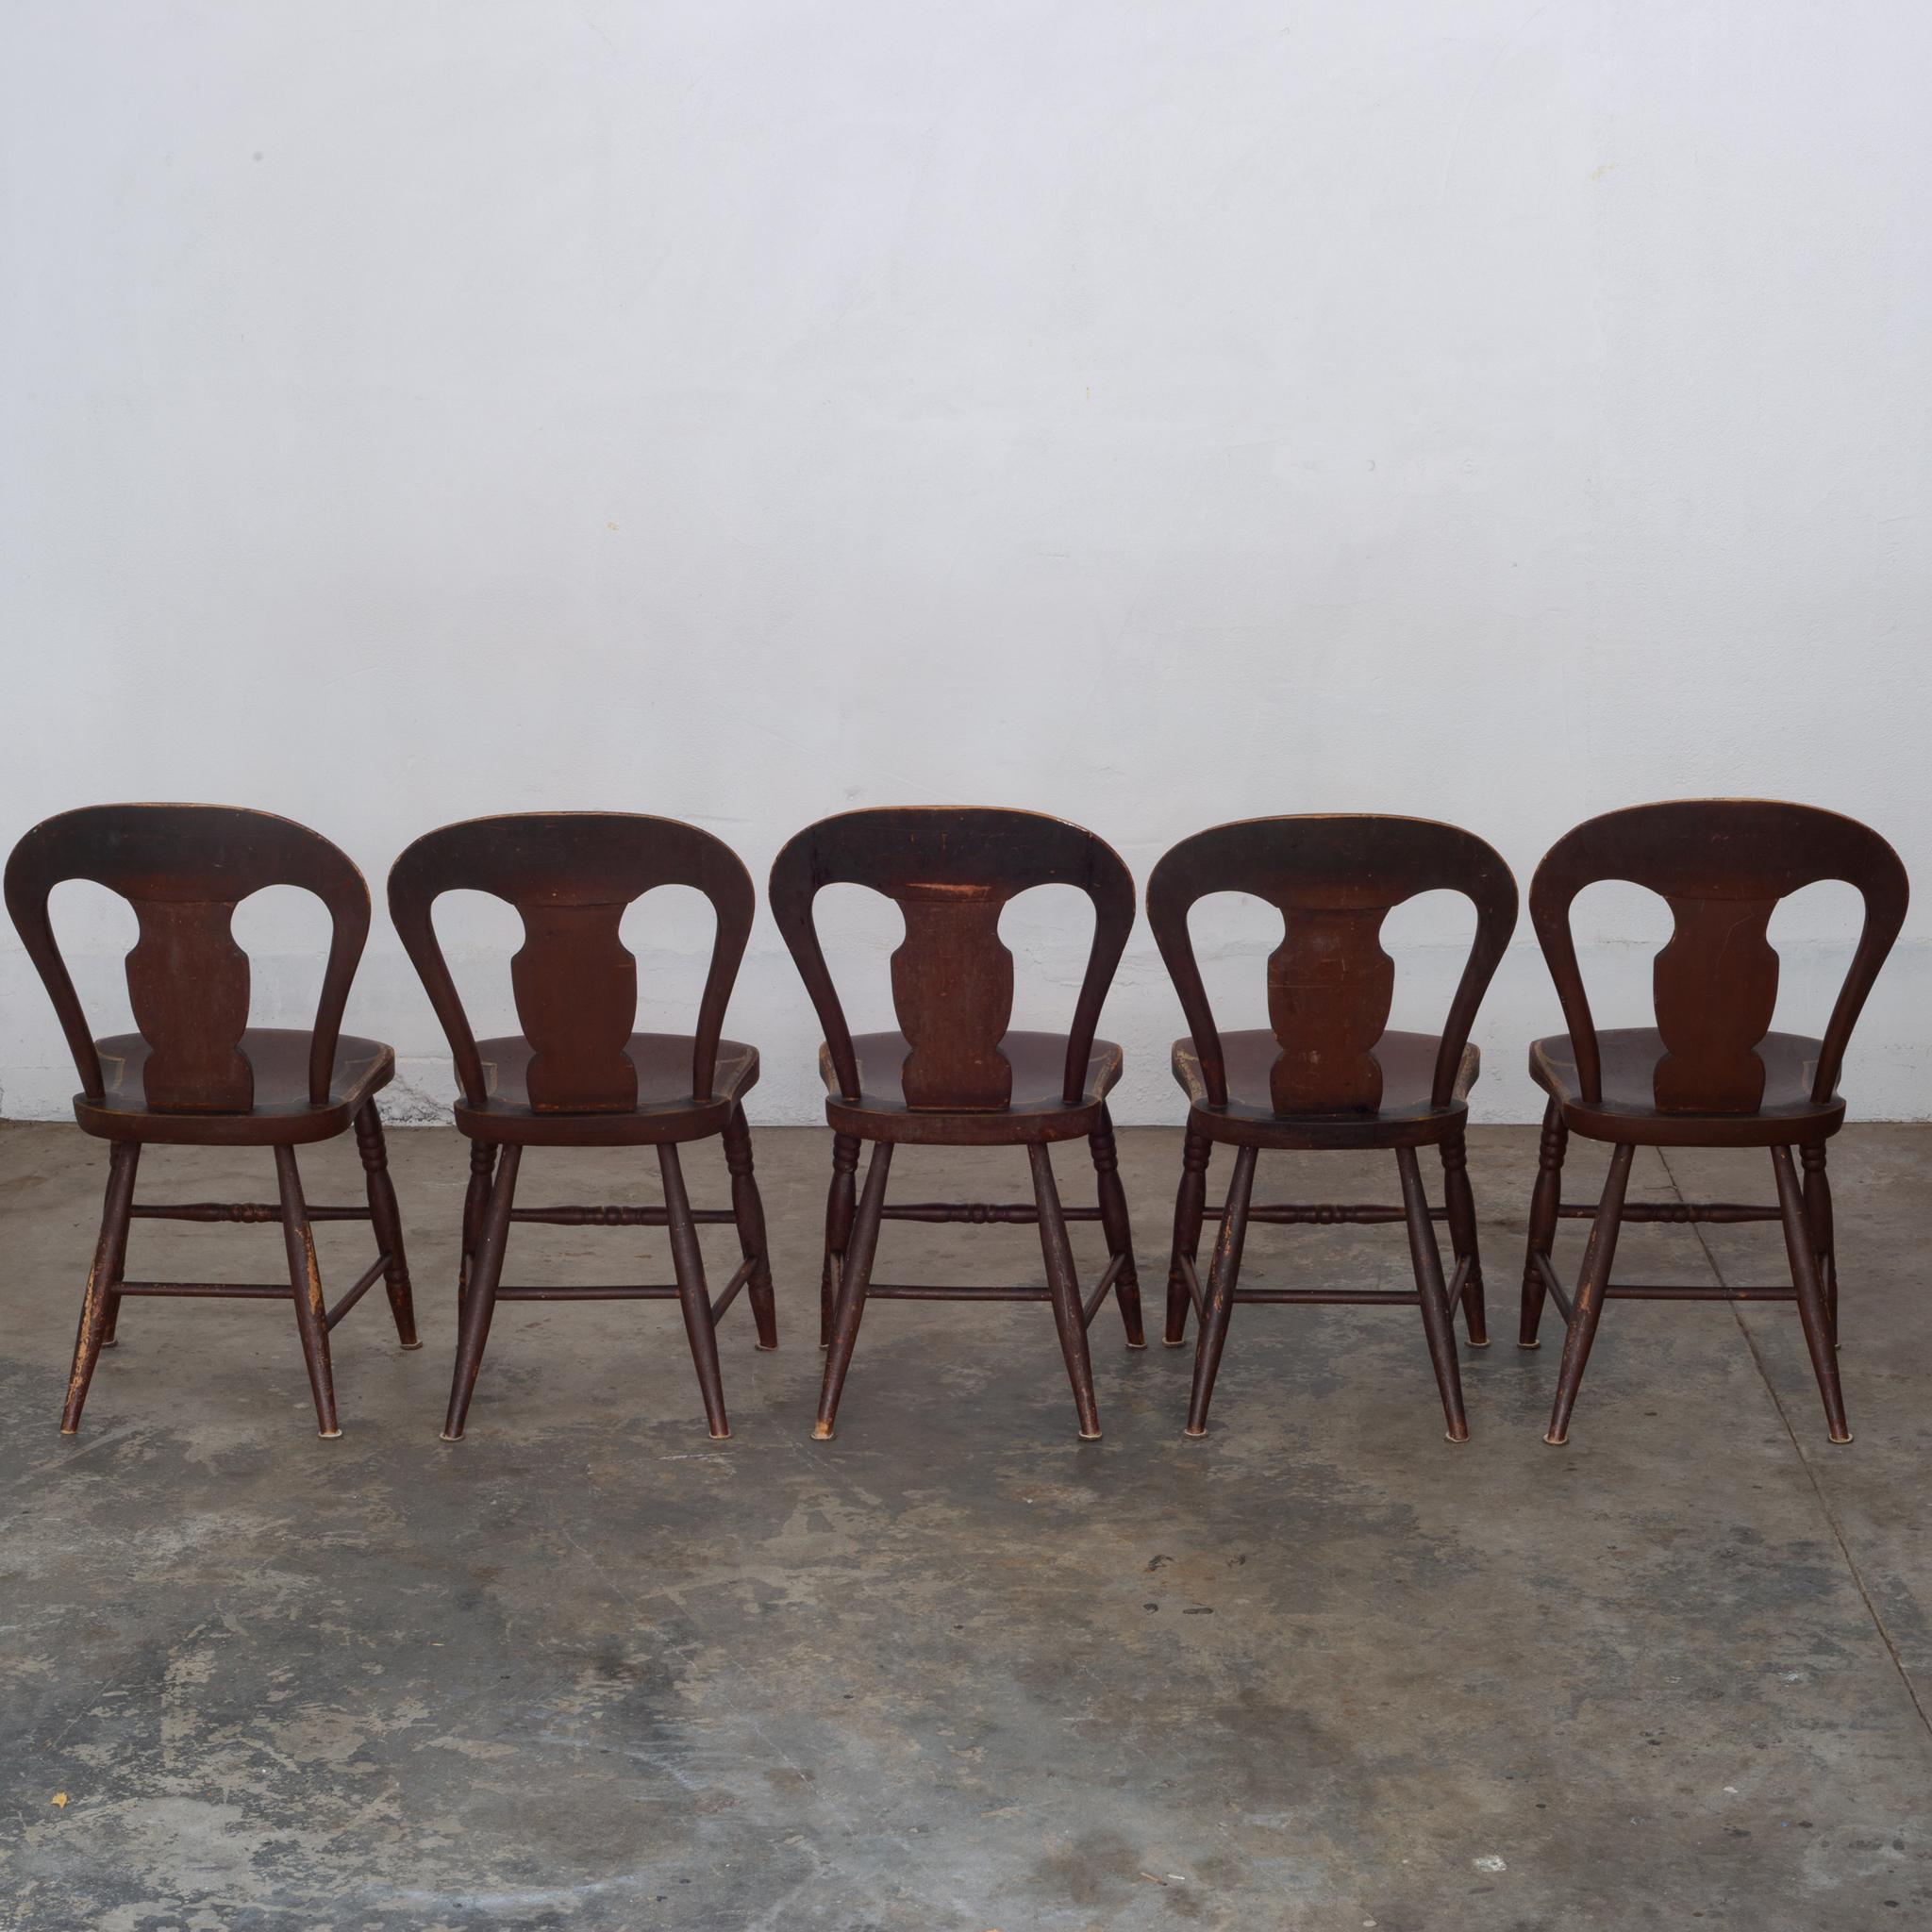 19th Century Set of Federal Period Pennsylvania Painted Chairs, circa 1810